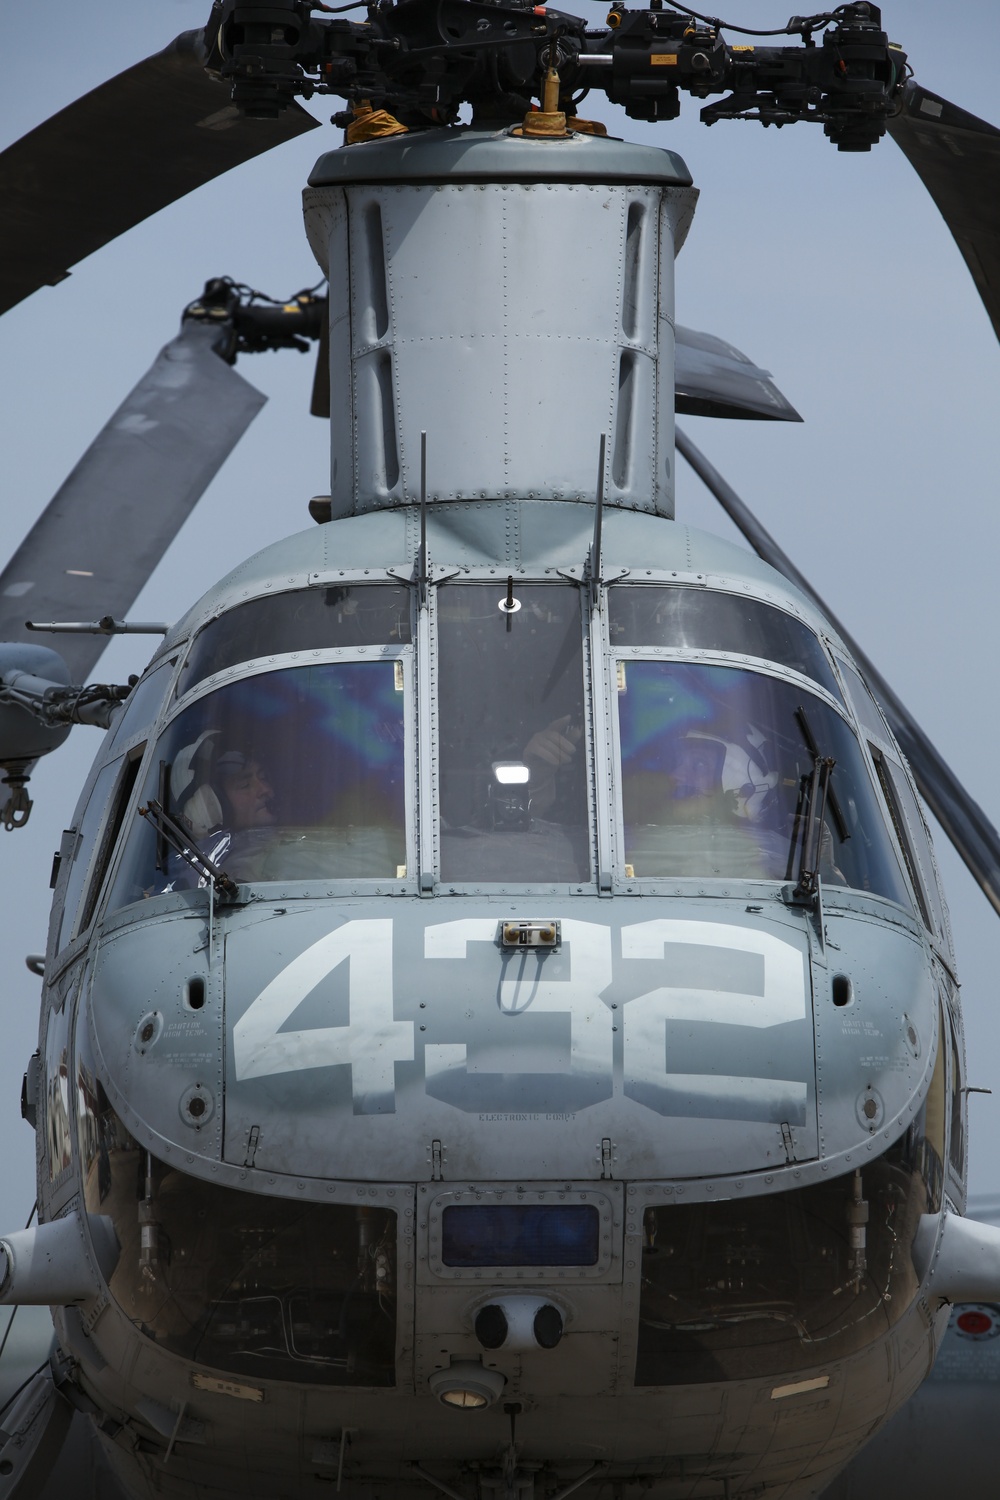 DVIDS - Images - Last of the Phrogs (CH-46E) [Image 8 of 12]